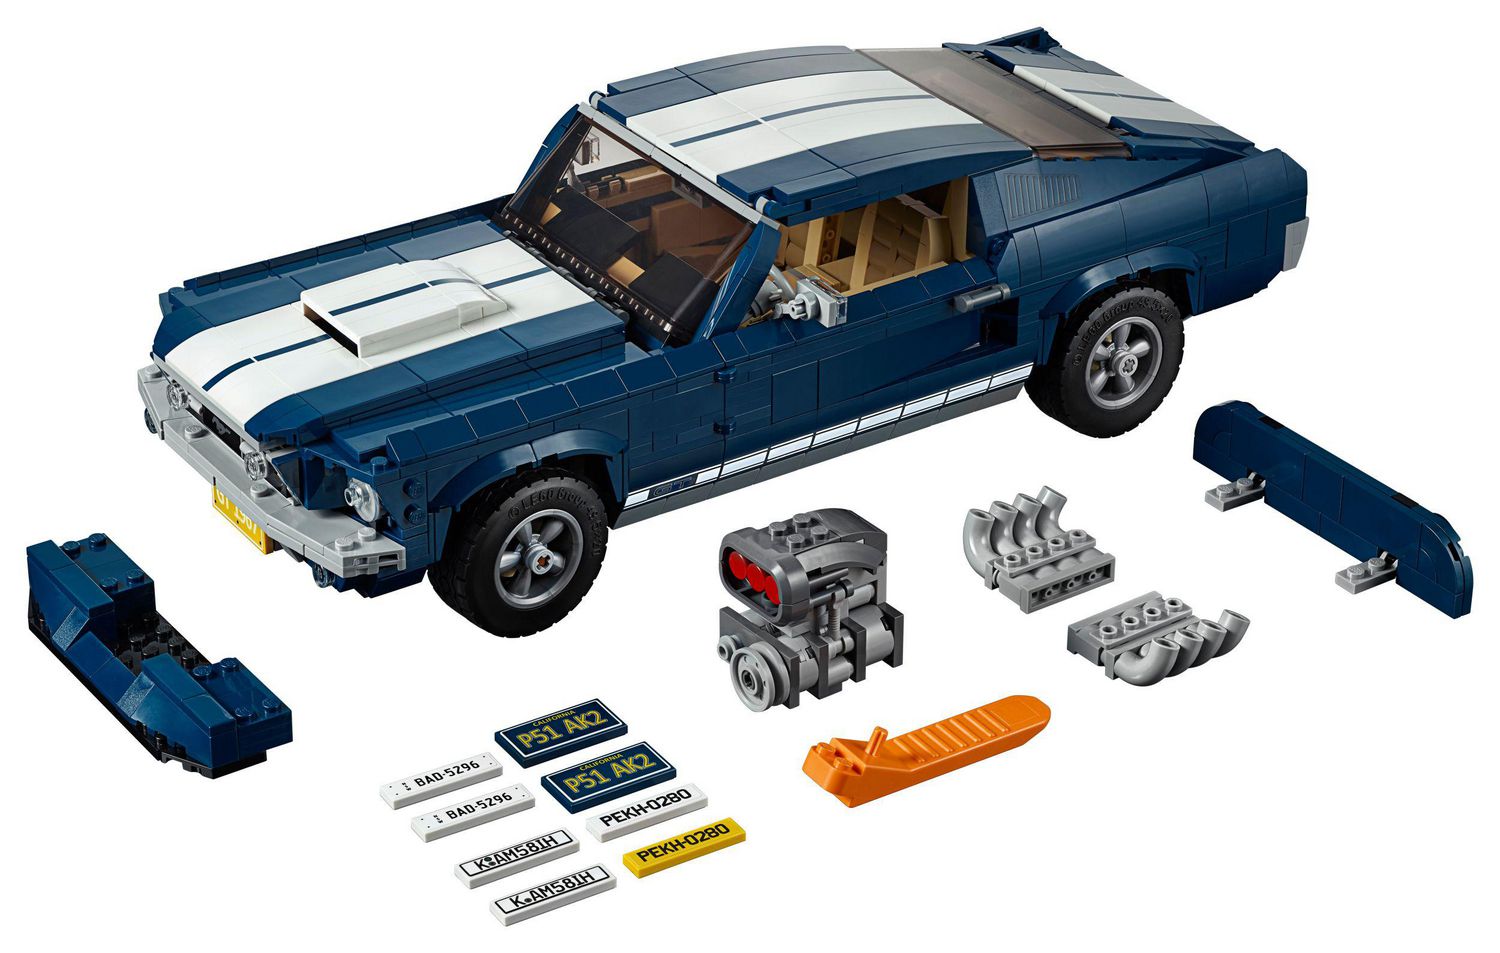 LEGO Ford Mustang – Awesome Alternate Instructions